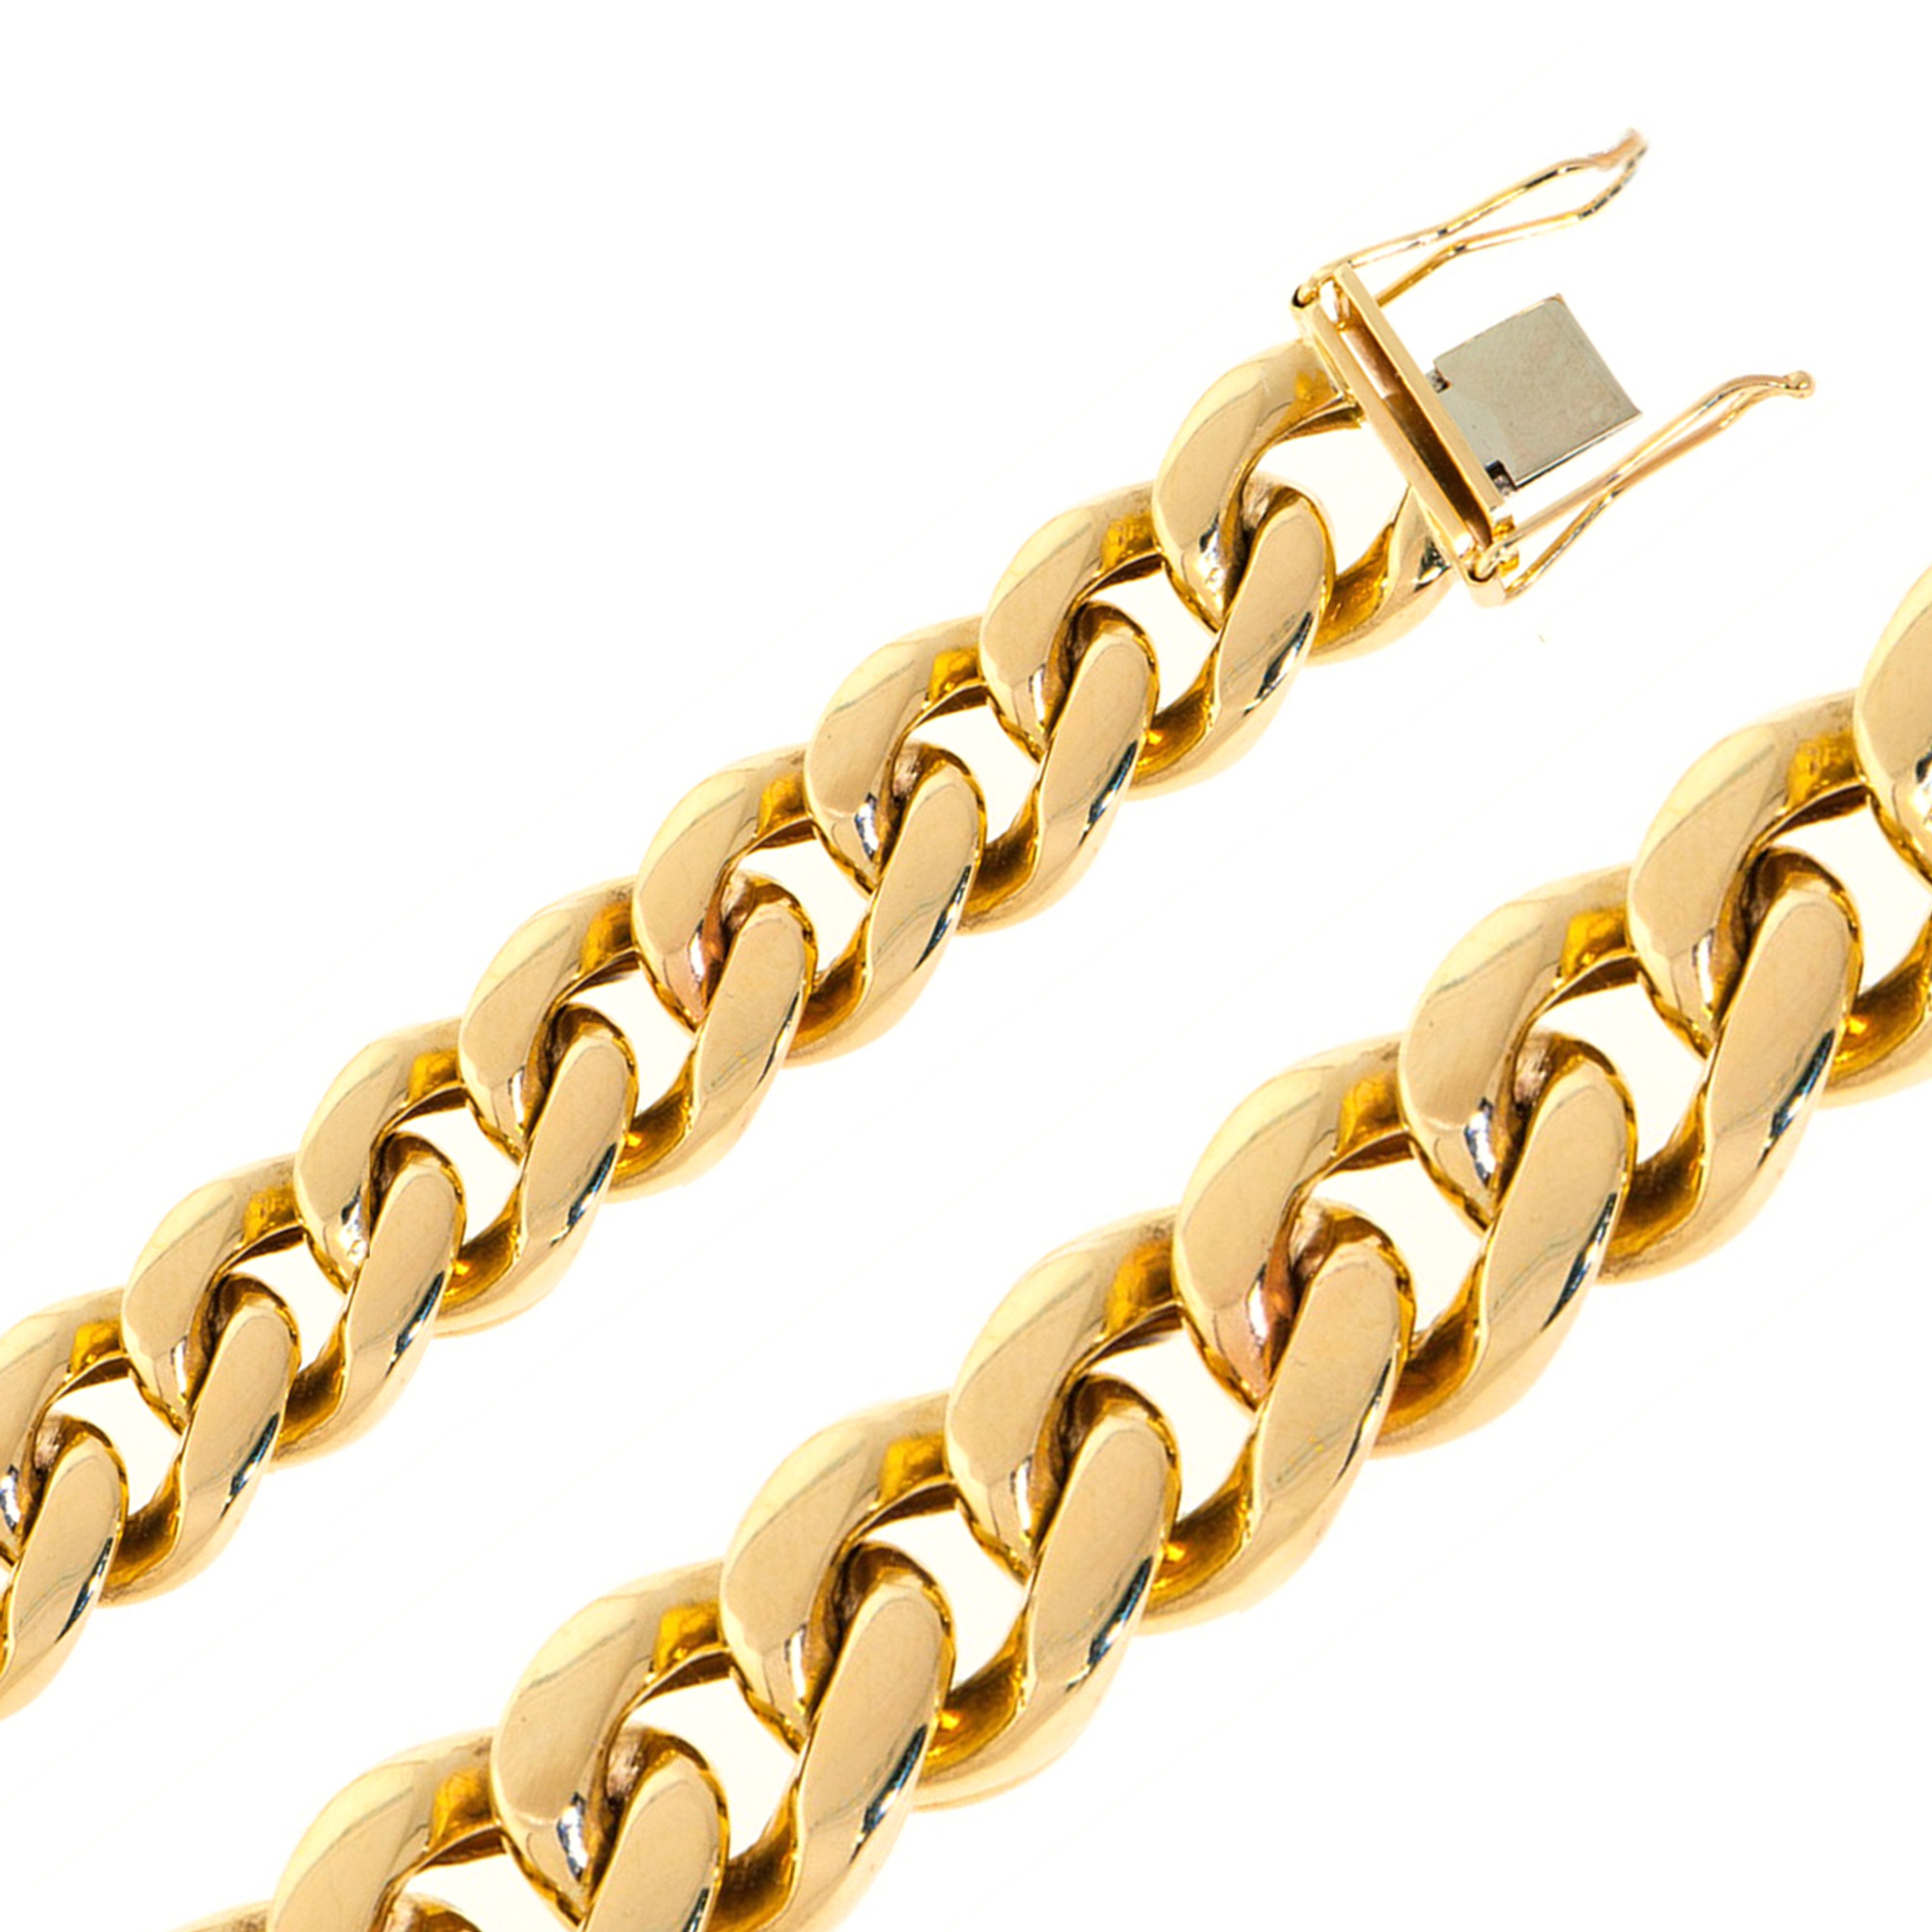 7 mm 14 KT. Yellow Gold Curb Link Chain (chain Length: 20)